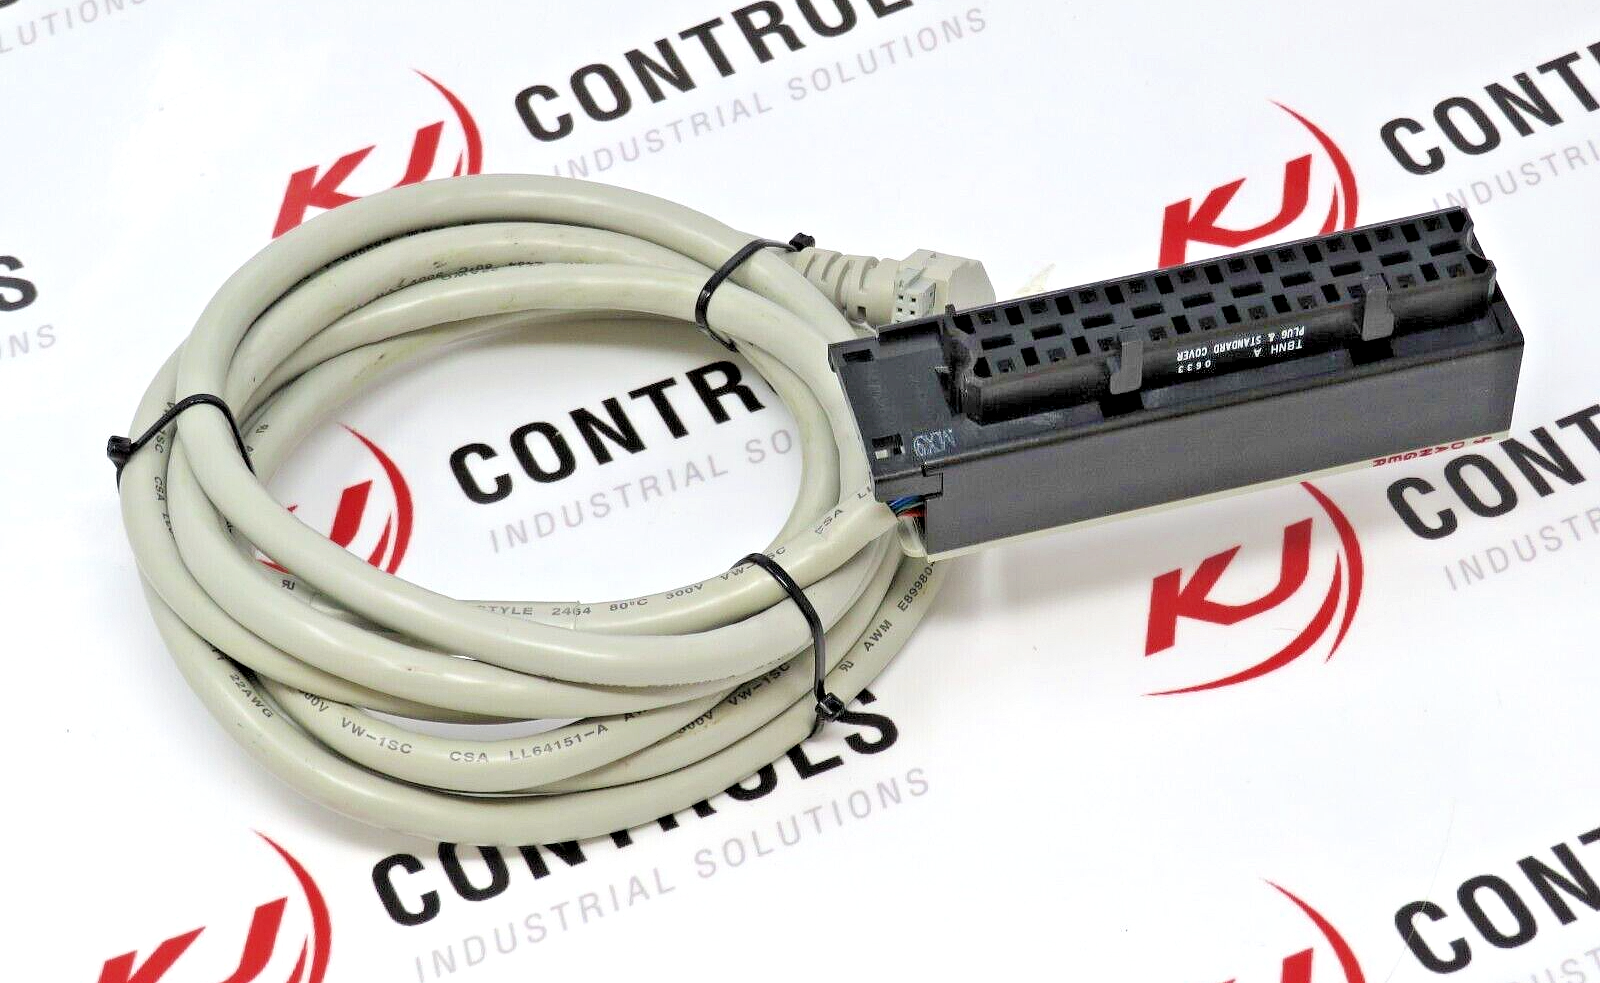 Allen-Bradley 1492-CABLE025X Pre-wired 2.5 M 8.2 FT Digital Connection Cable